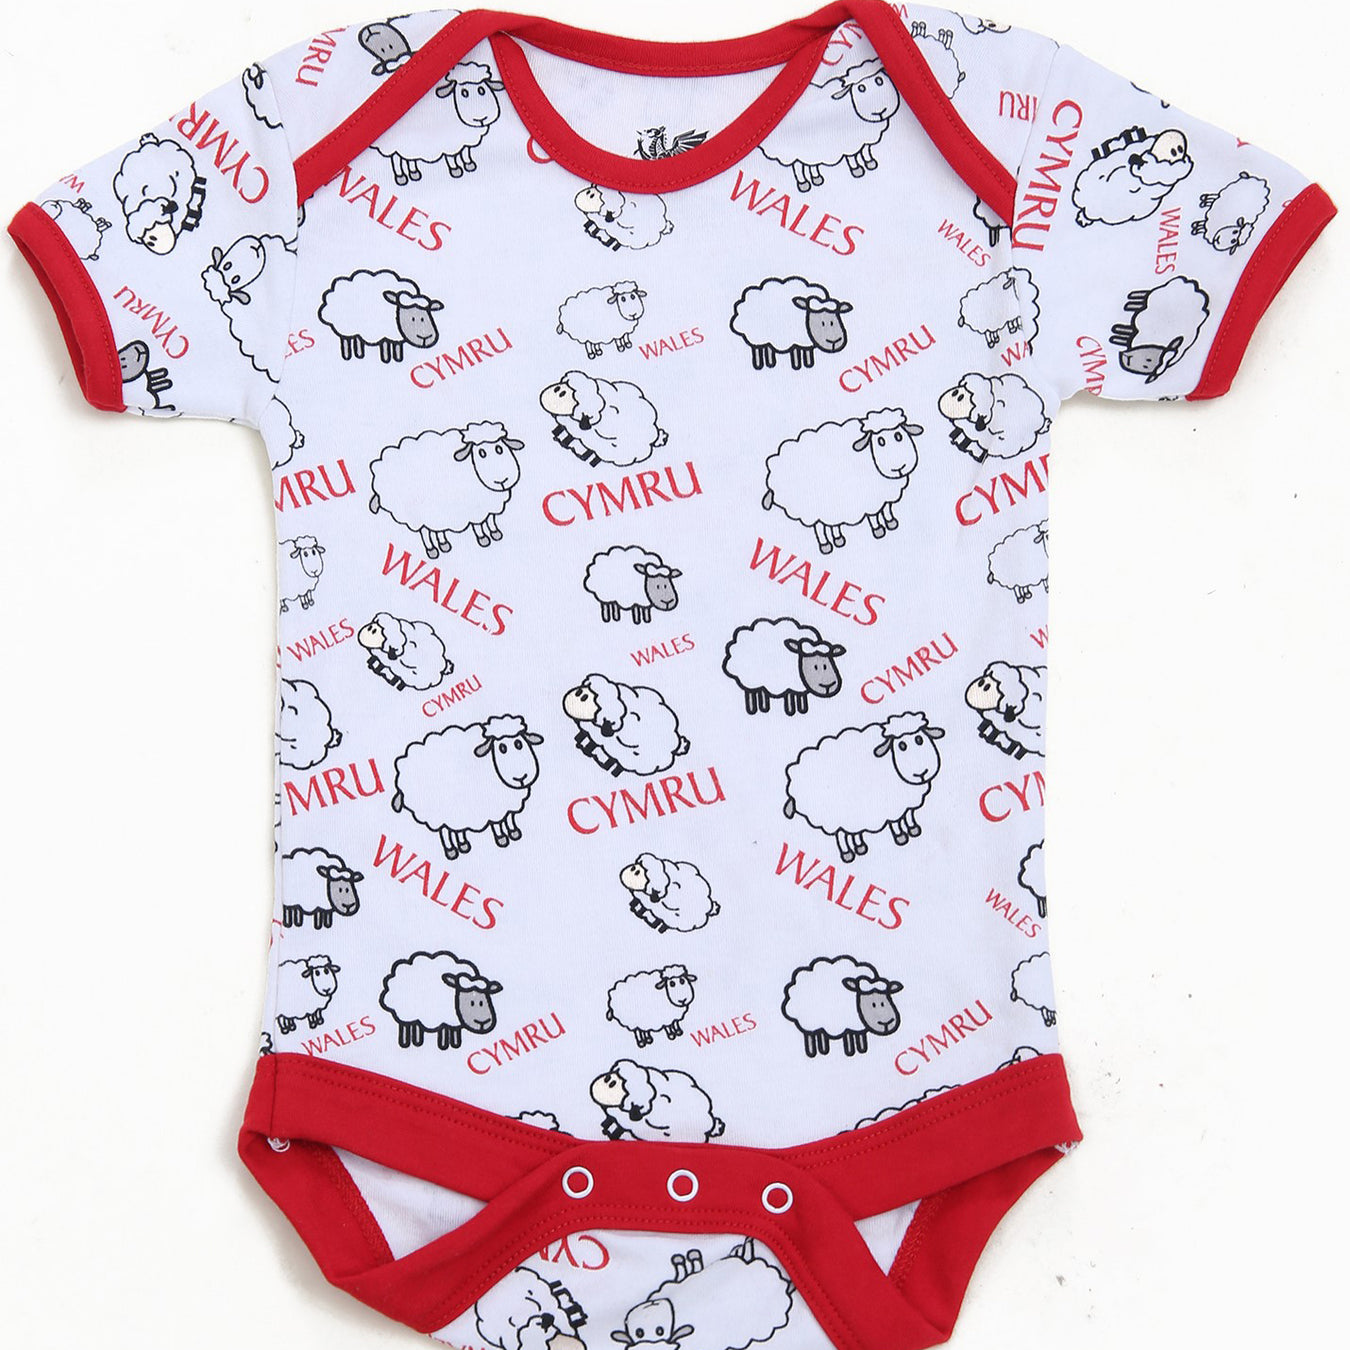 Welsh Baby Clothing and Accessories Gorgeous Welsh Baby Gifts